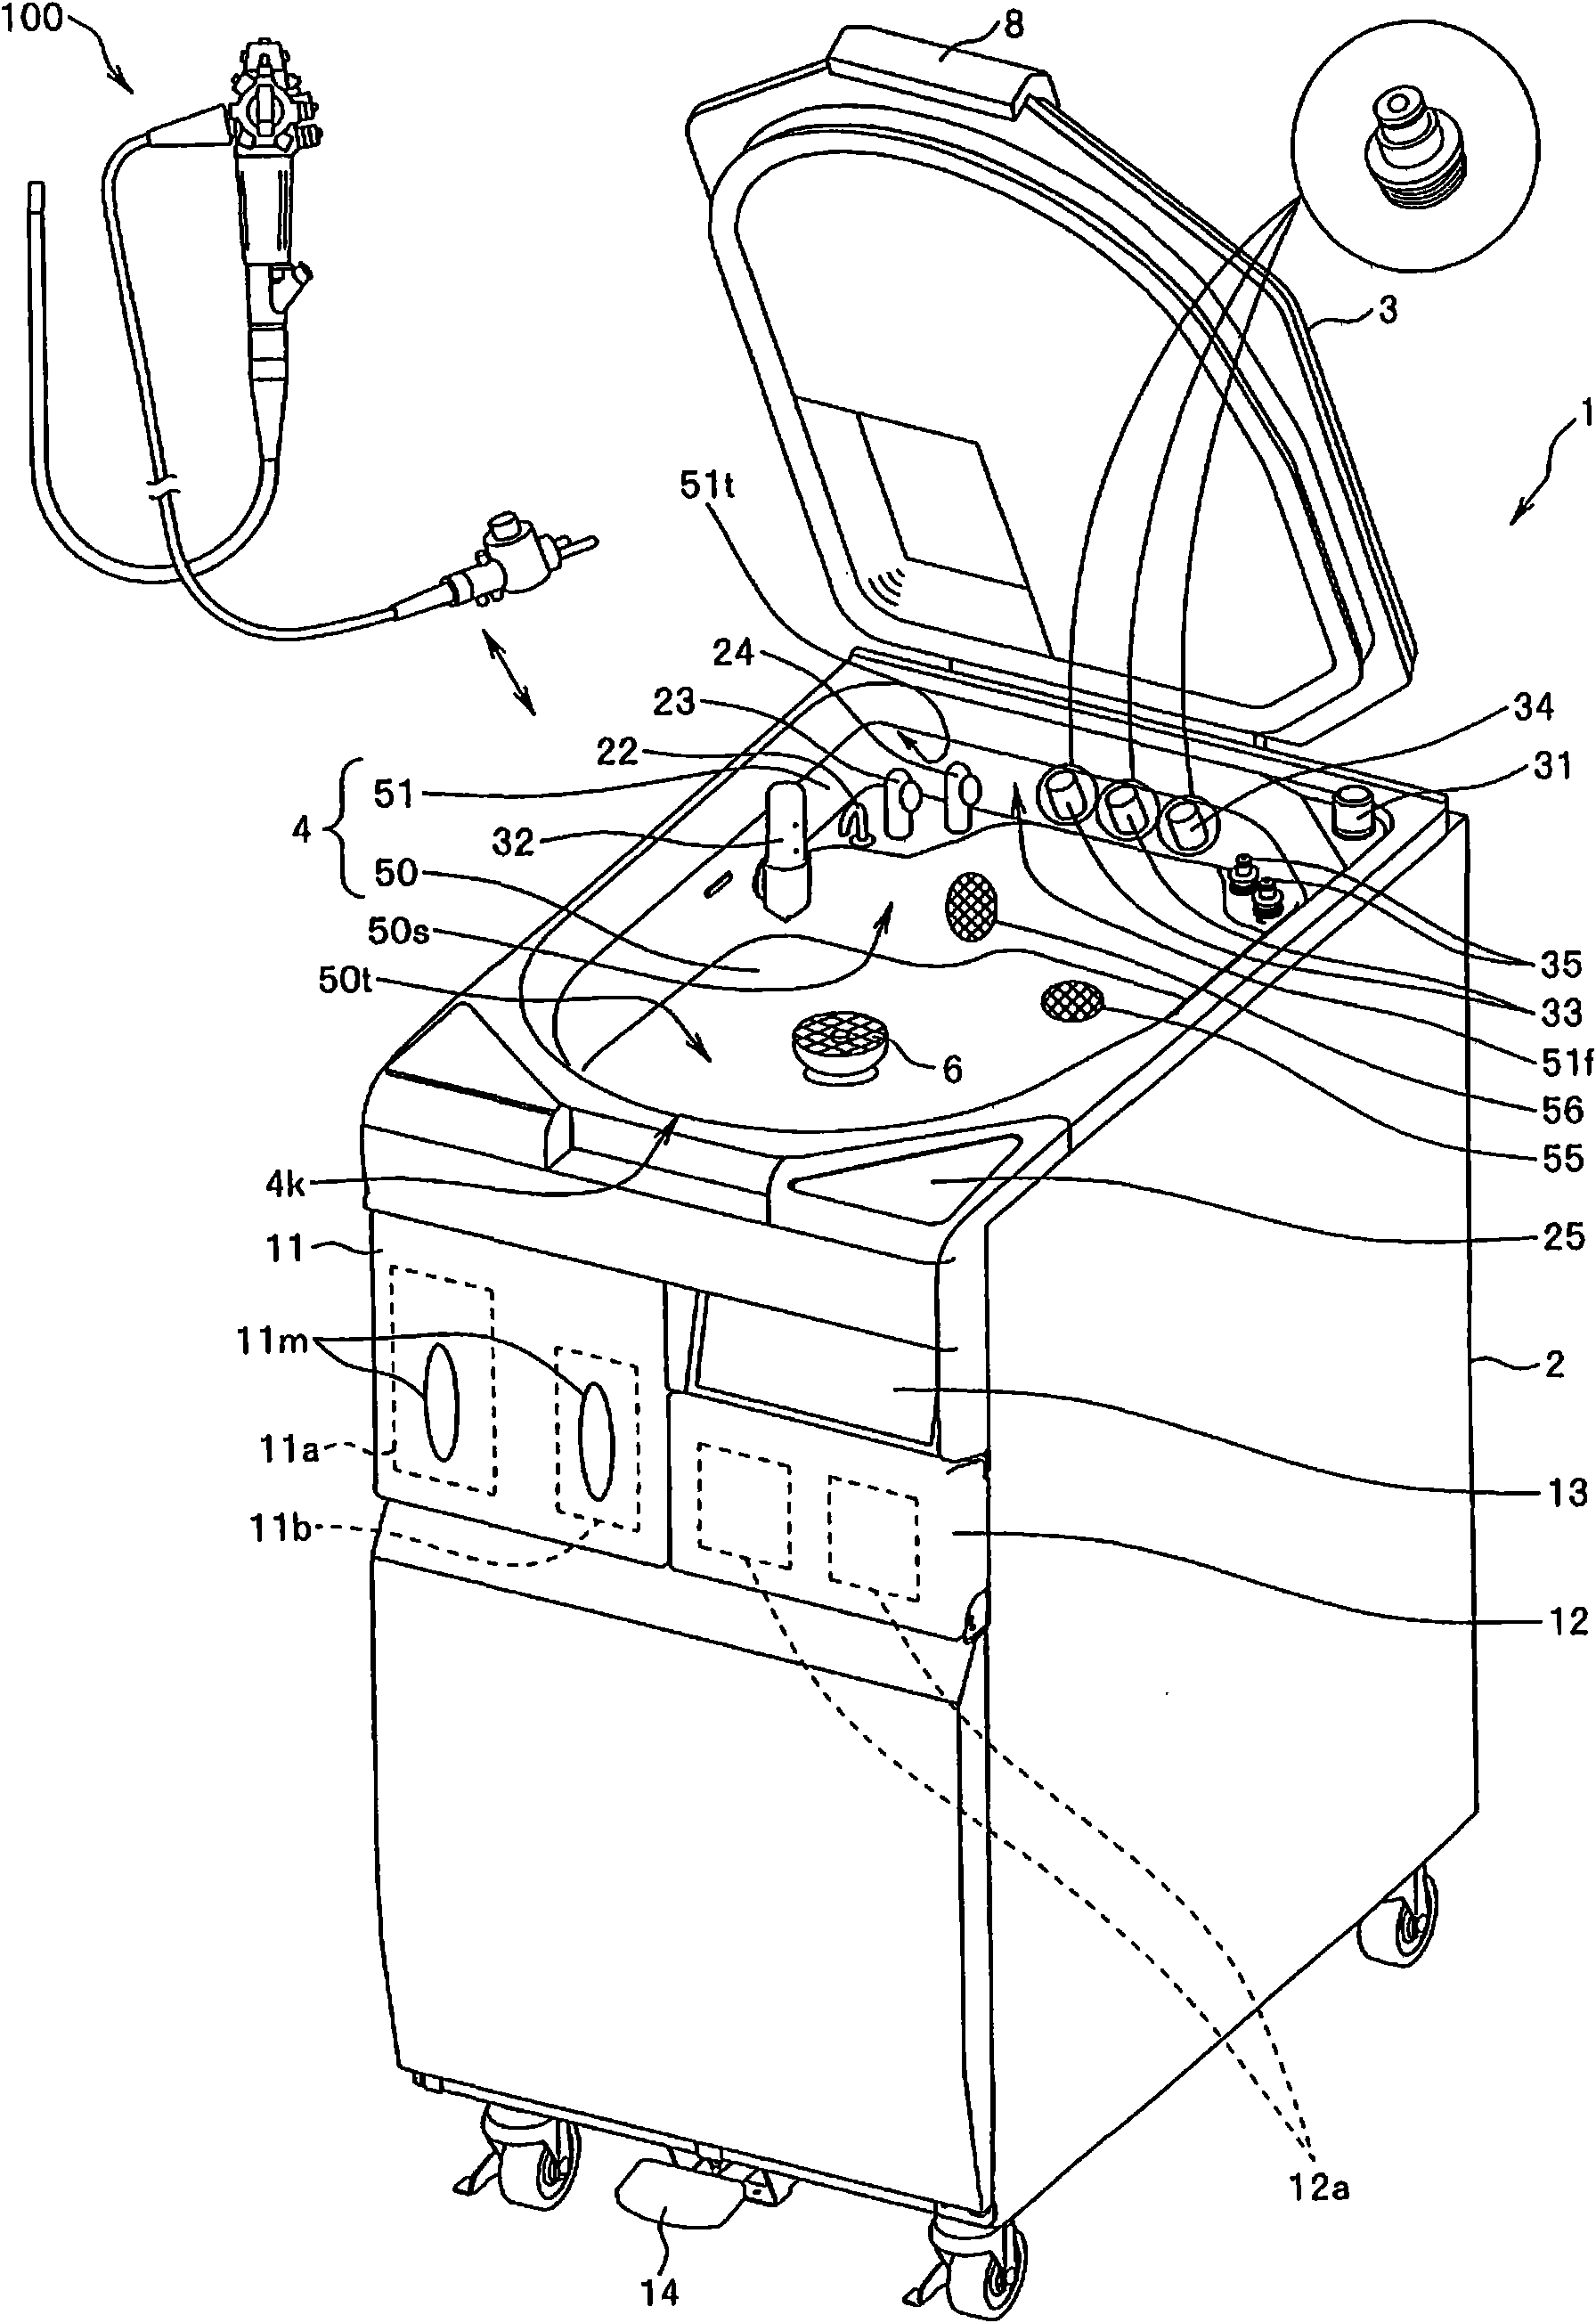 Endoscope washing and disinfecting apparatus and method of washing endoscope using endoscope washing and disinfecting apparatus